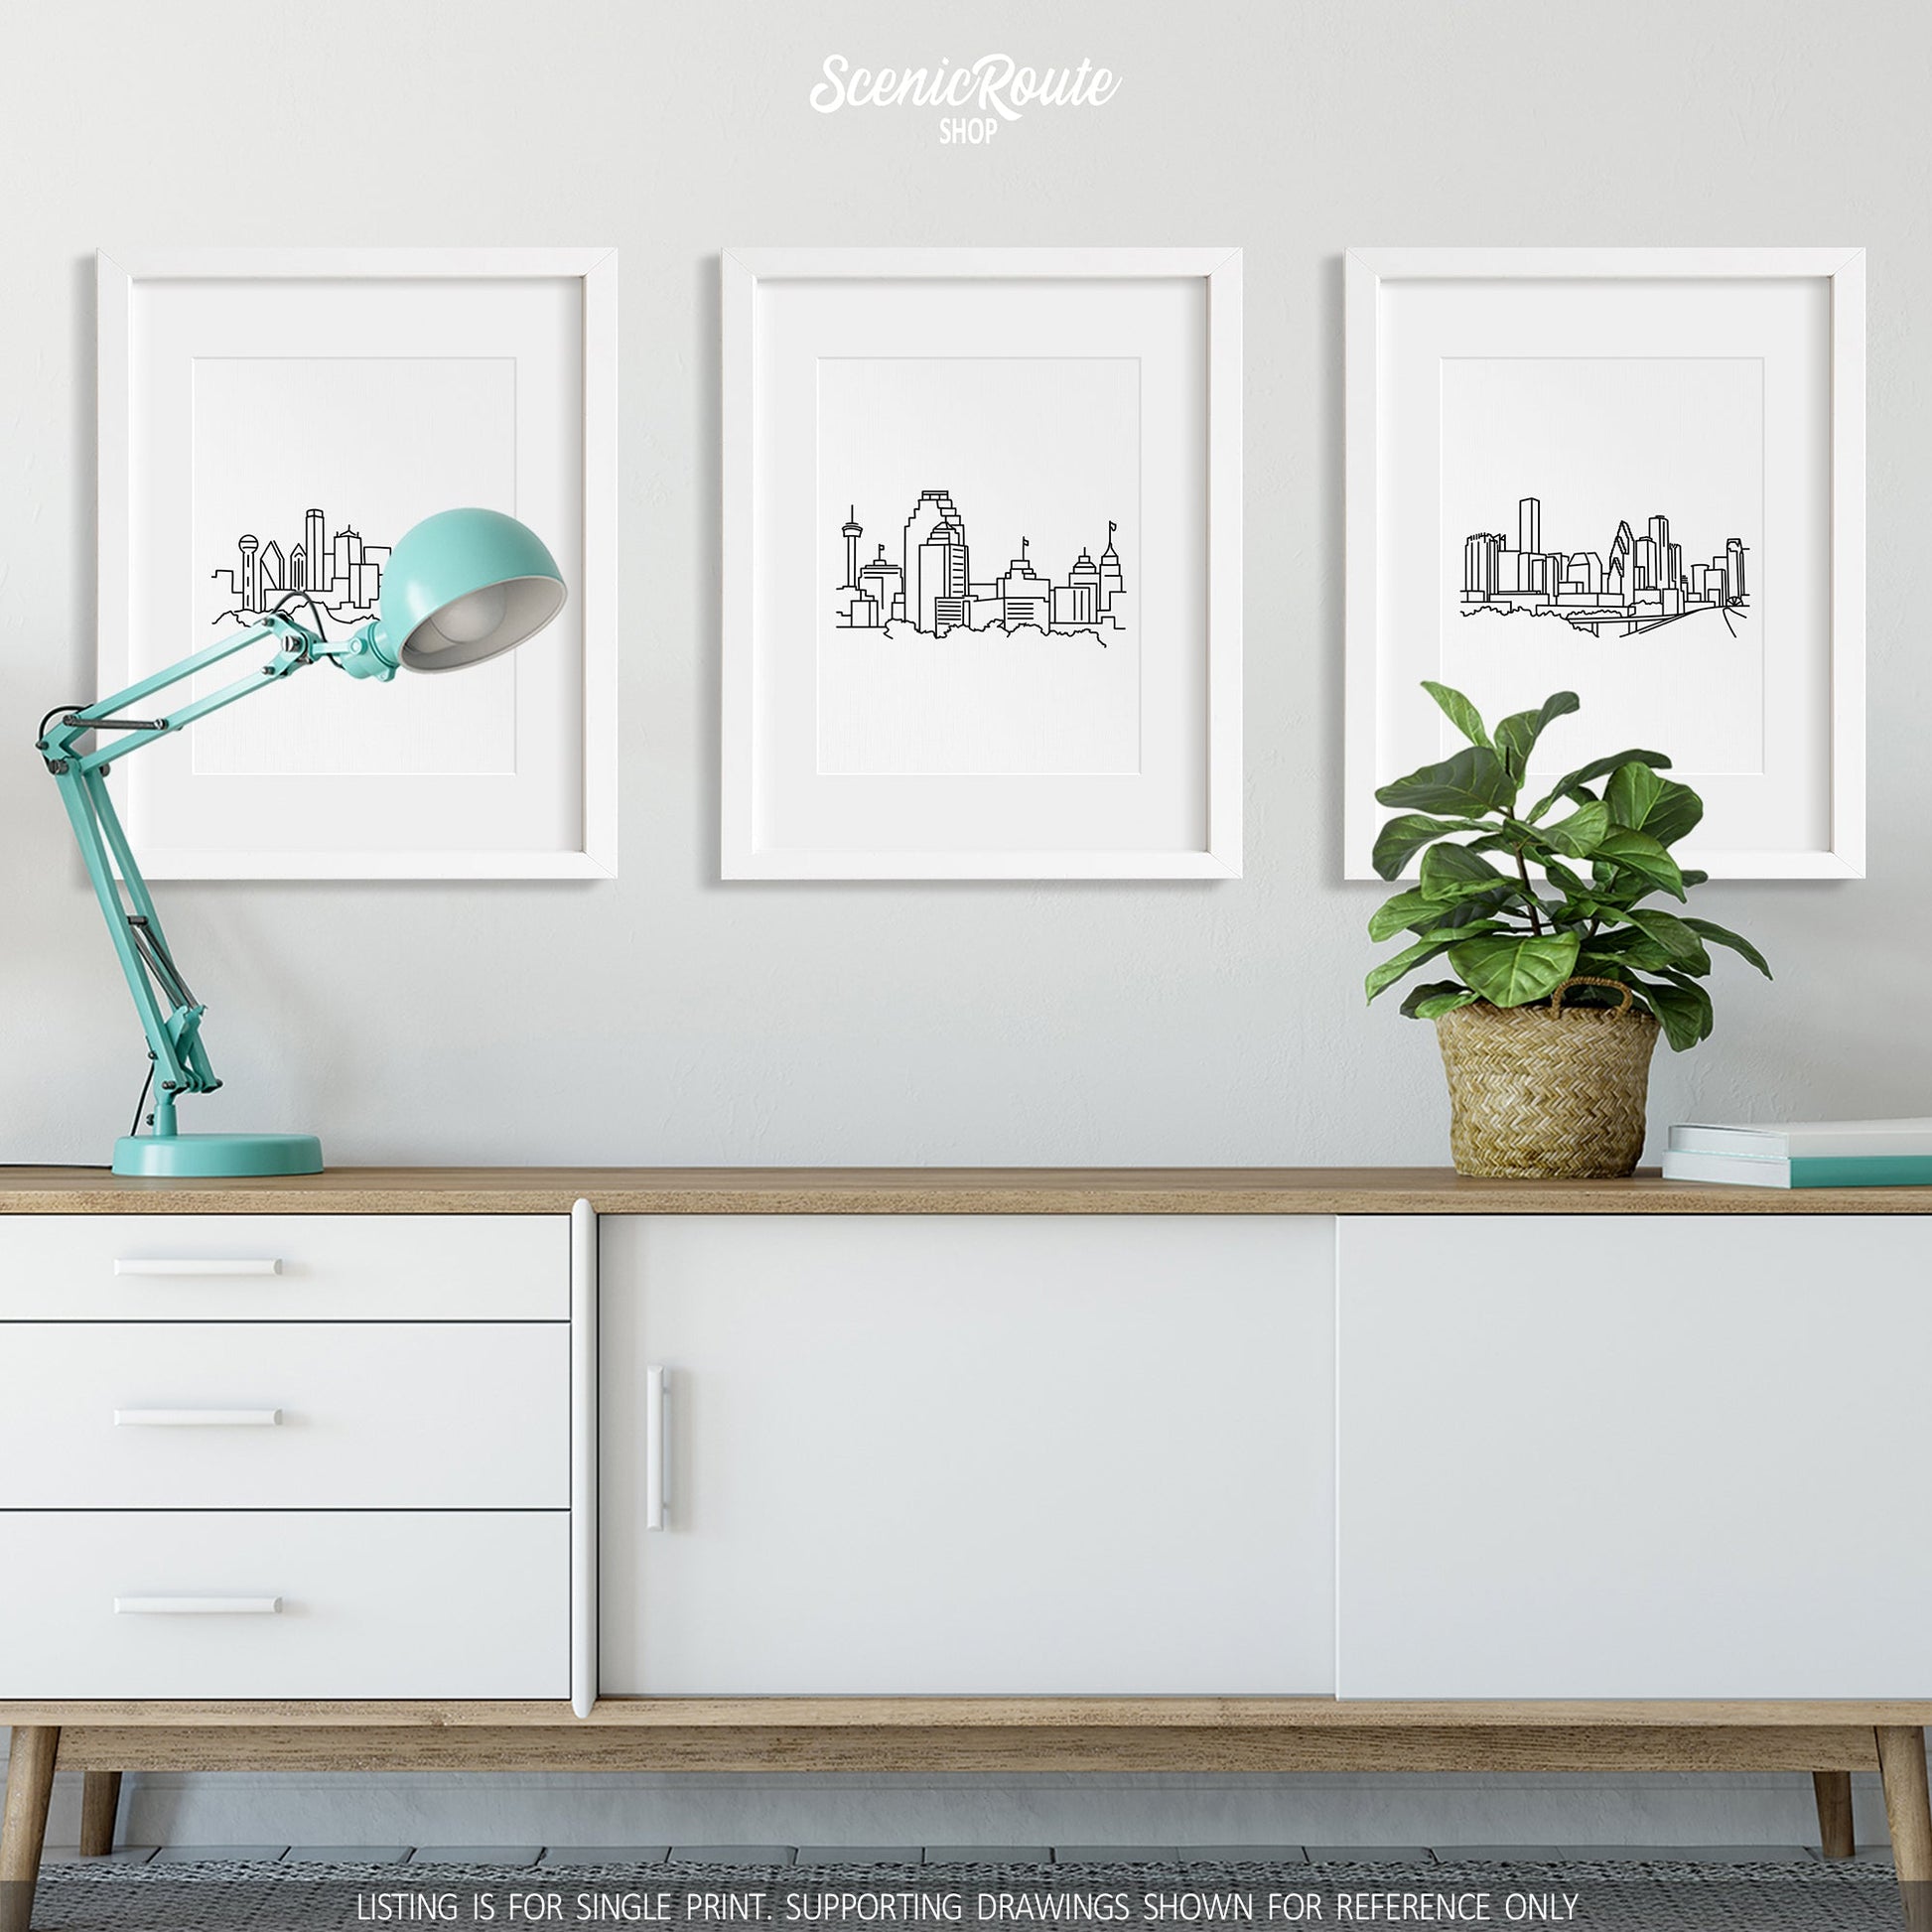 A group of three framed drawings on a wall hanging above a credenza with a lamp and a potted plant. The line art drawings include the Dallas Skyline, San Antonio Skyline, and the Houston Skyline